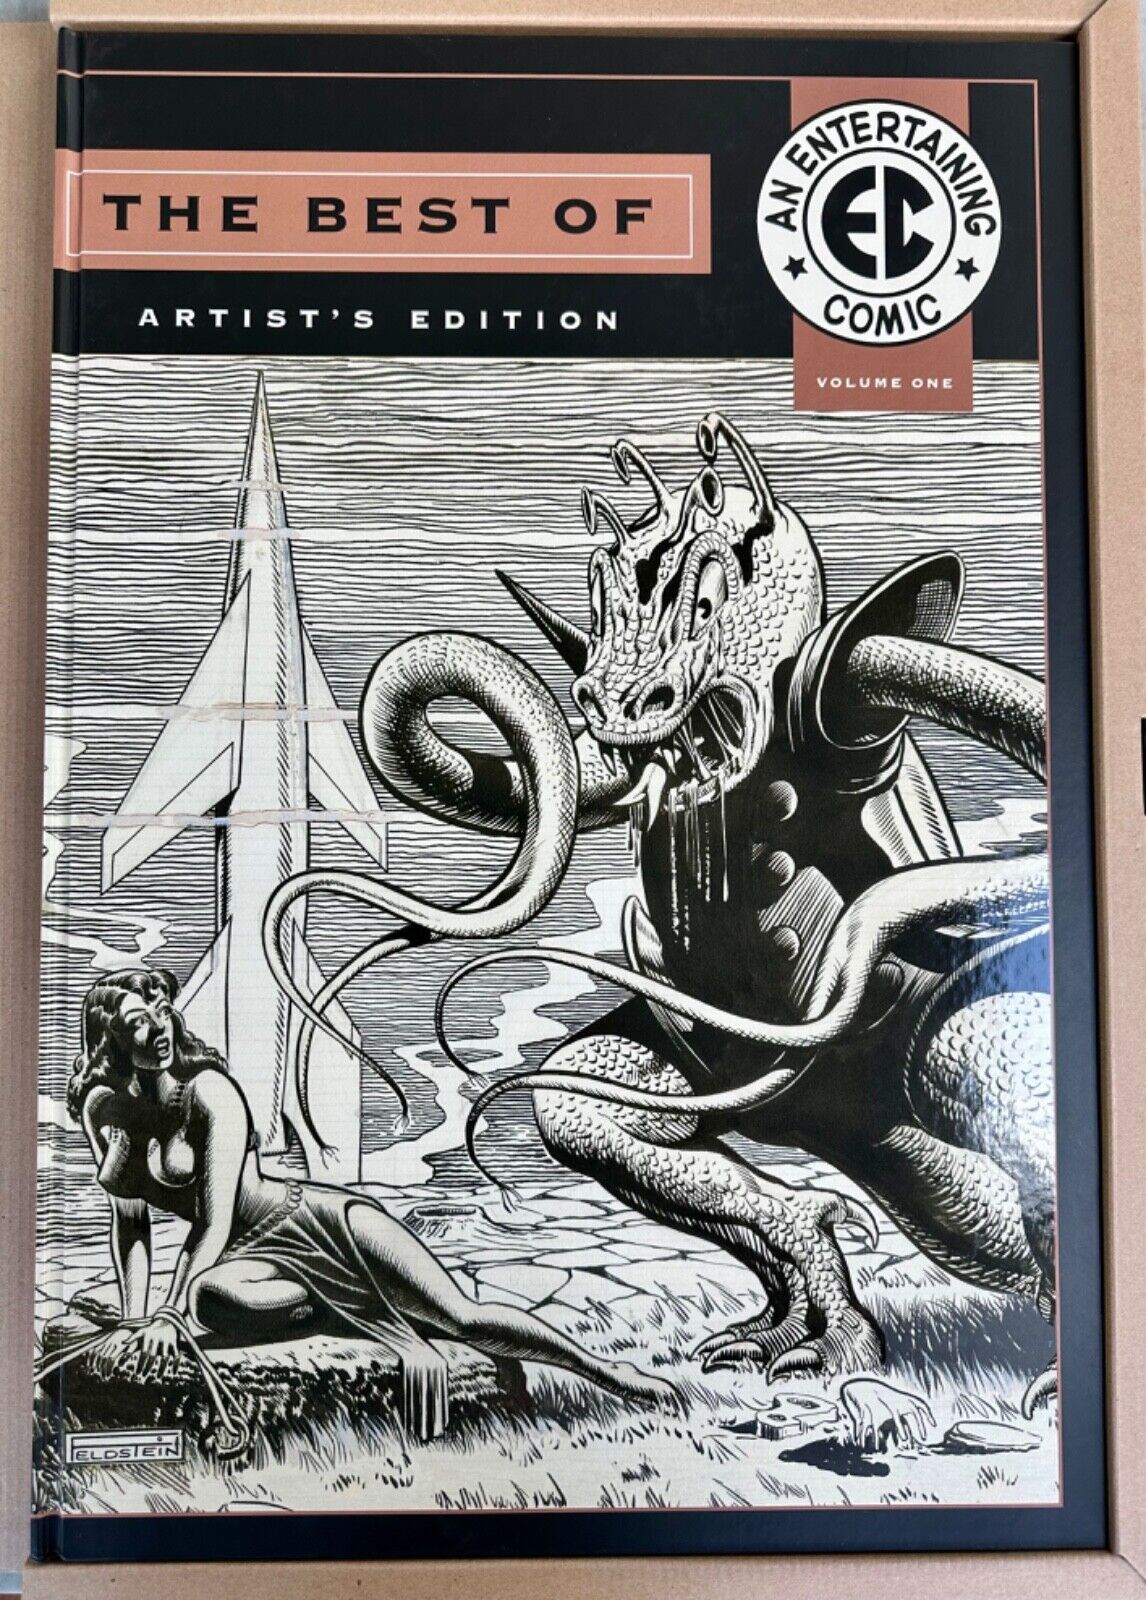 The Best of EC Artist Edition Vol. 1 Variant Signed Al Feldstein Limited to 250